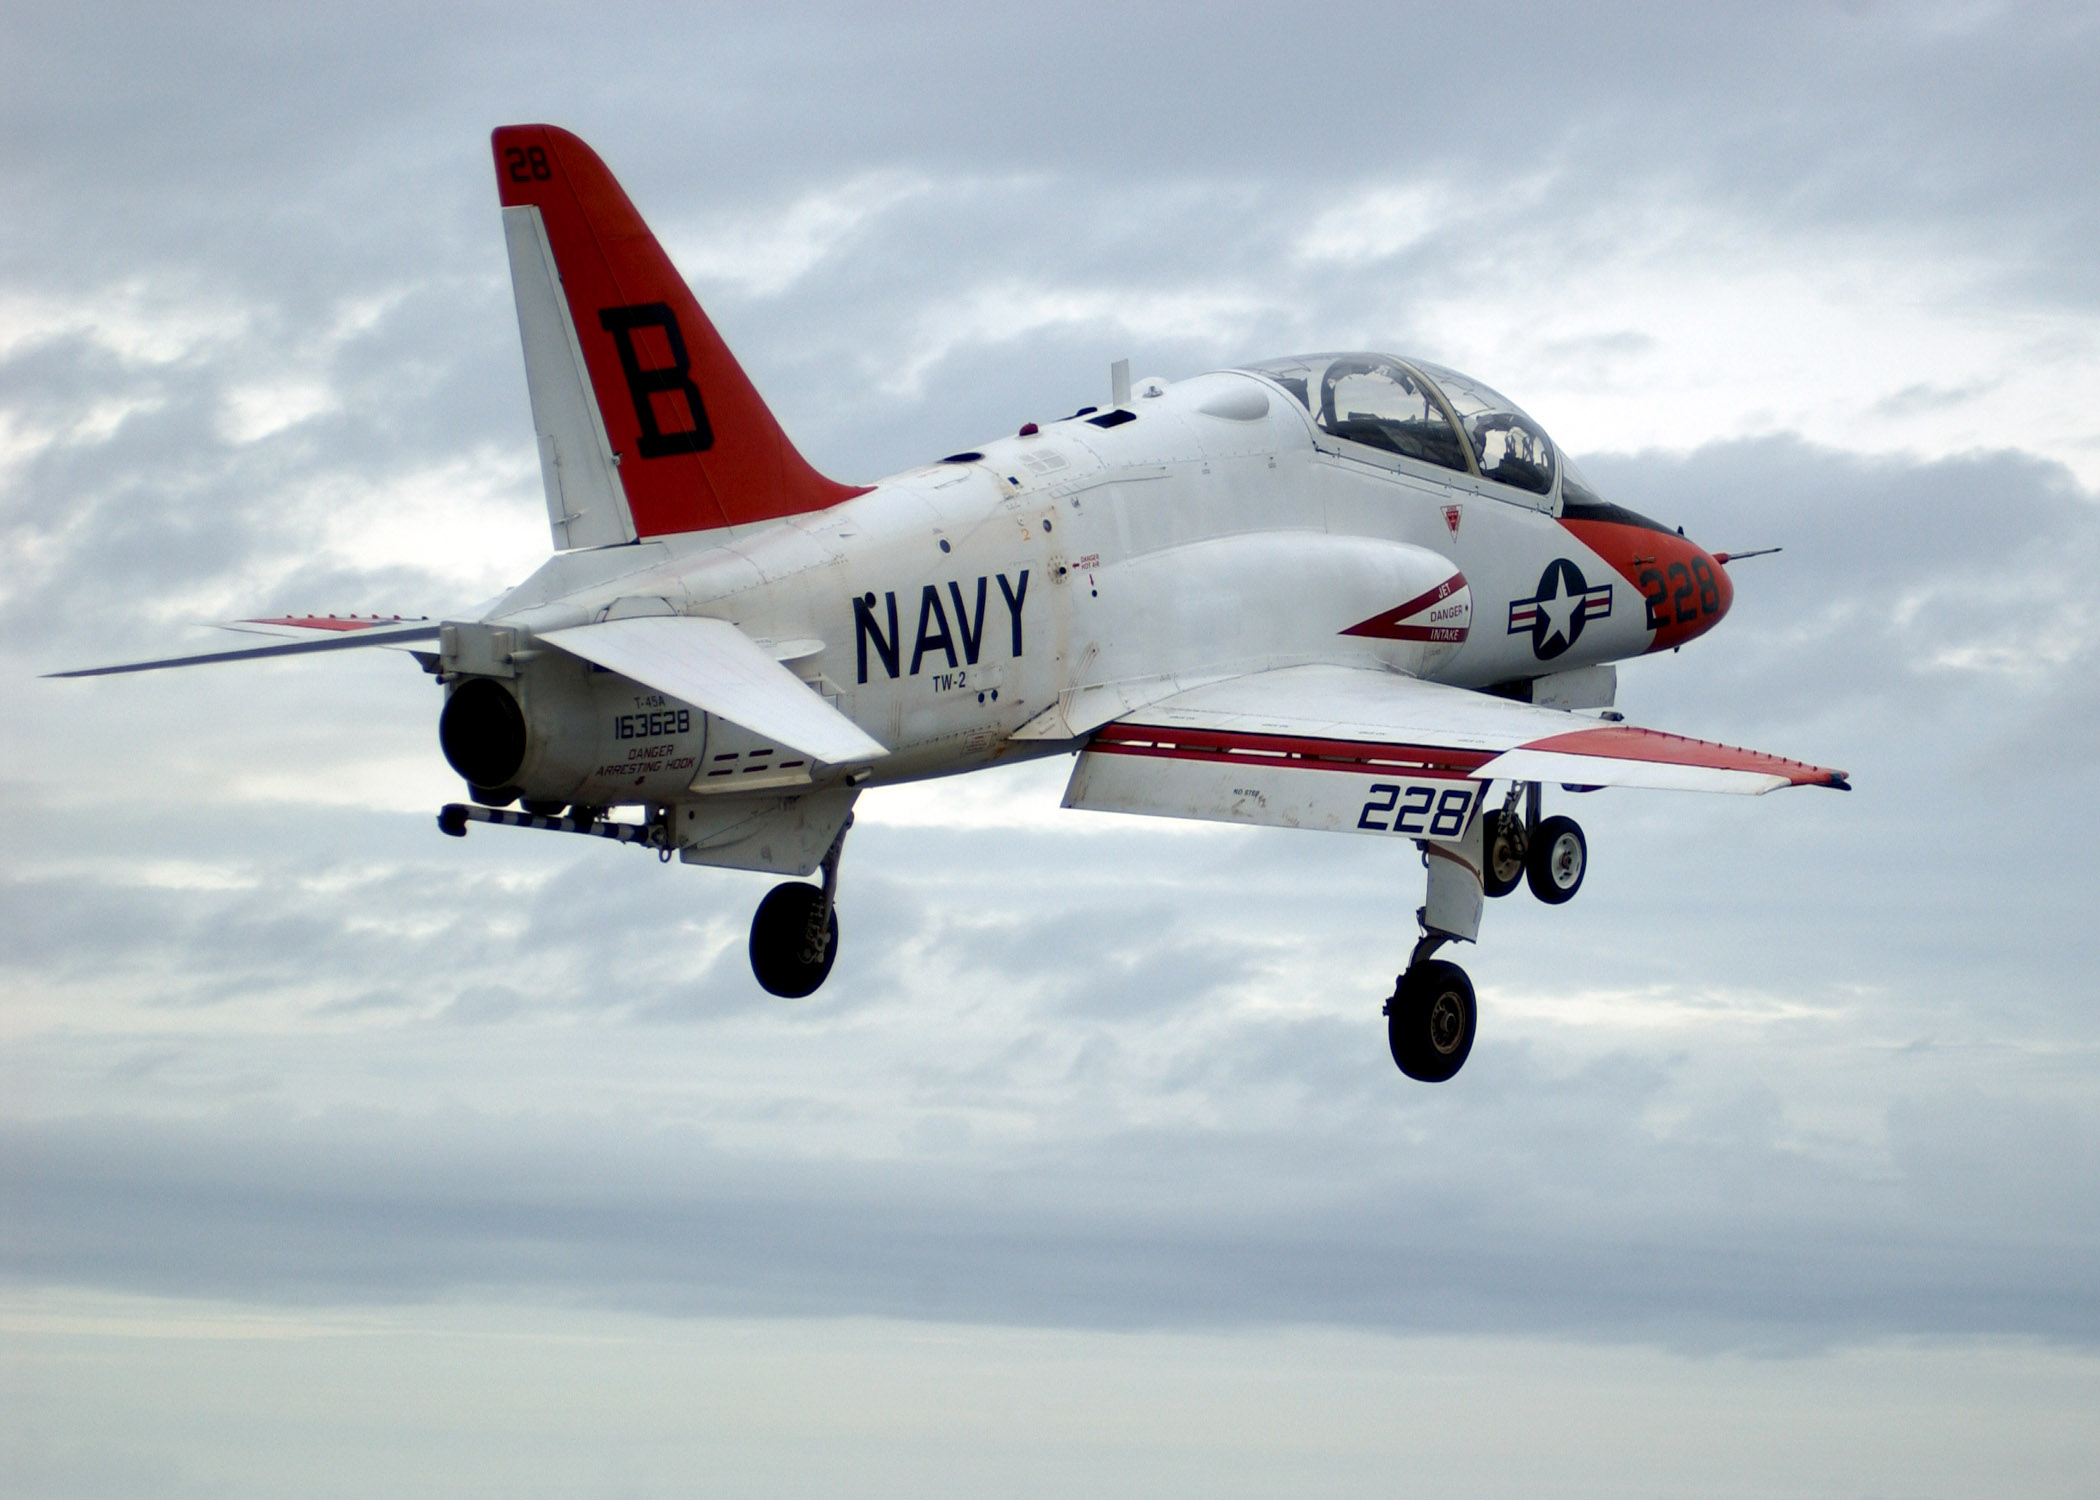 US Navy 061214-N-7241L-004 A T-45 Goshawk trainer gains altitude after performing a touch-and-go during carrier qualifications aboard USS Theodore Roosevelt (CVN 71)